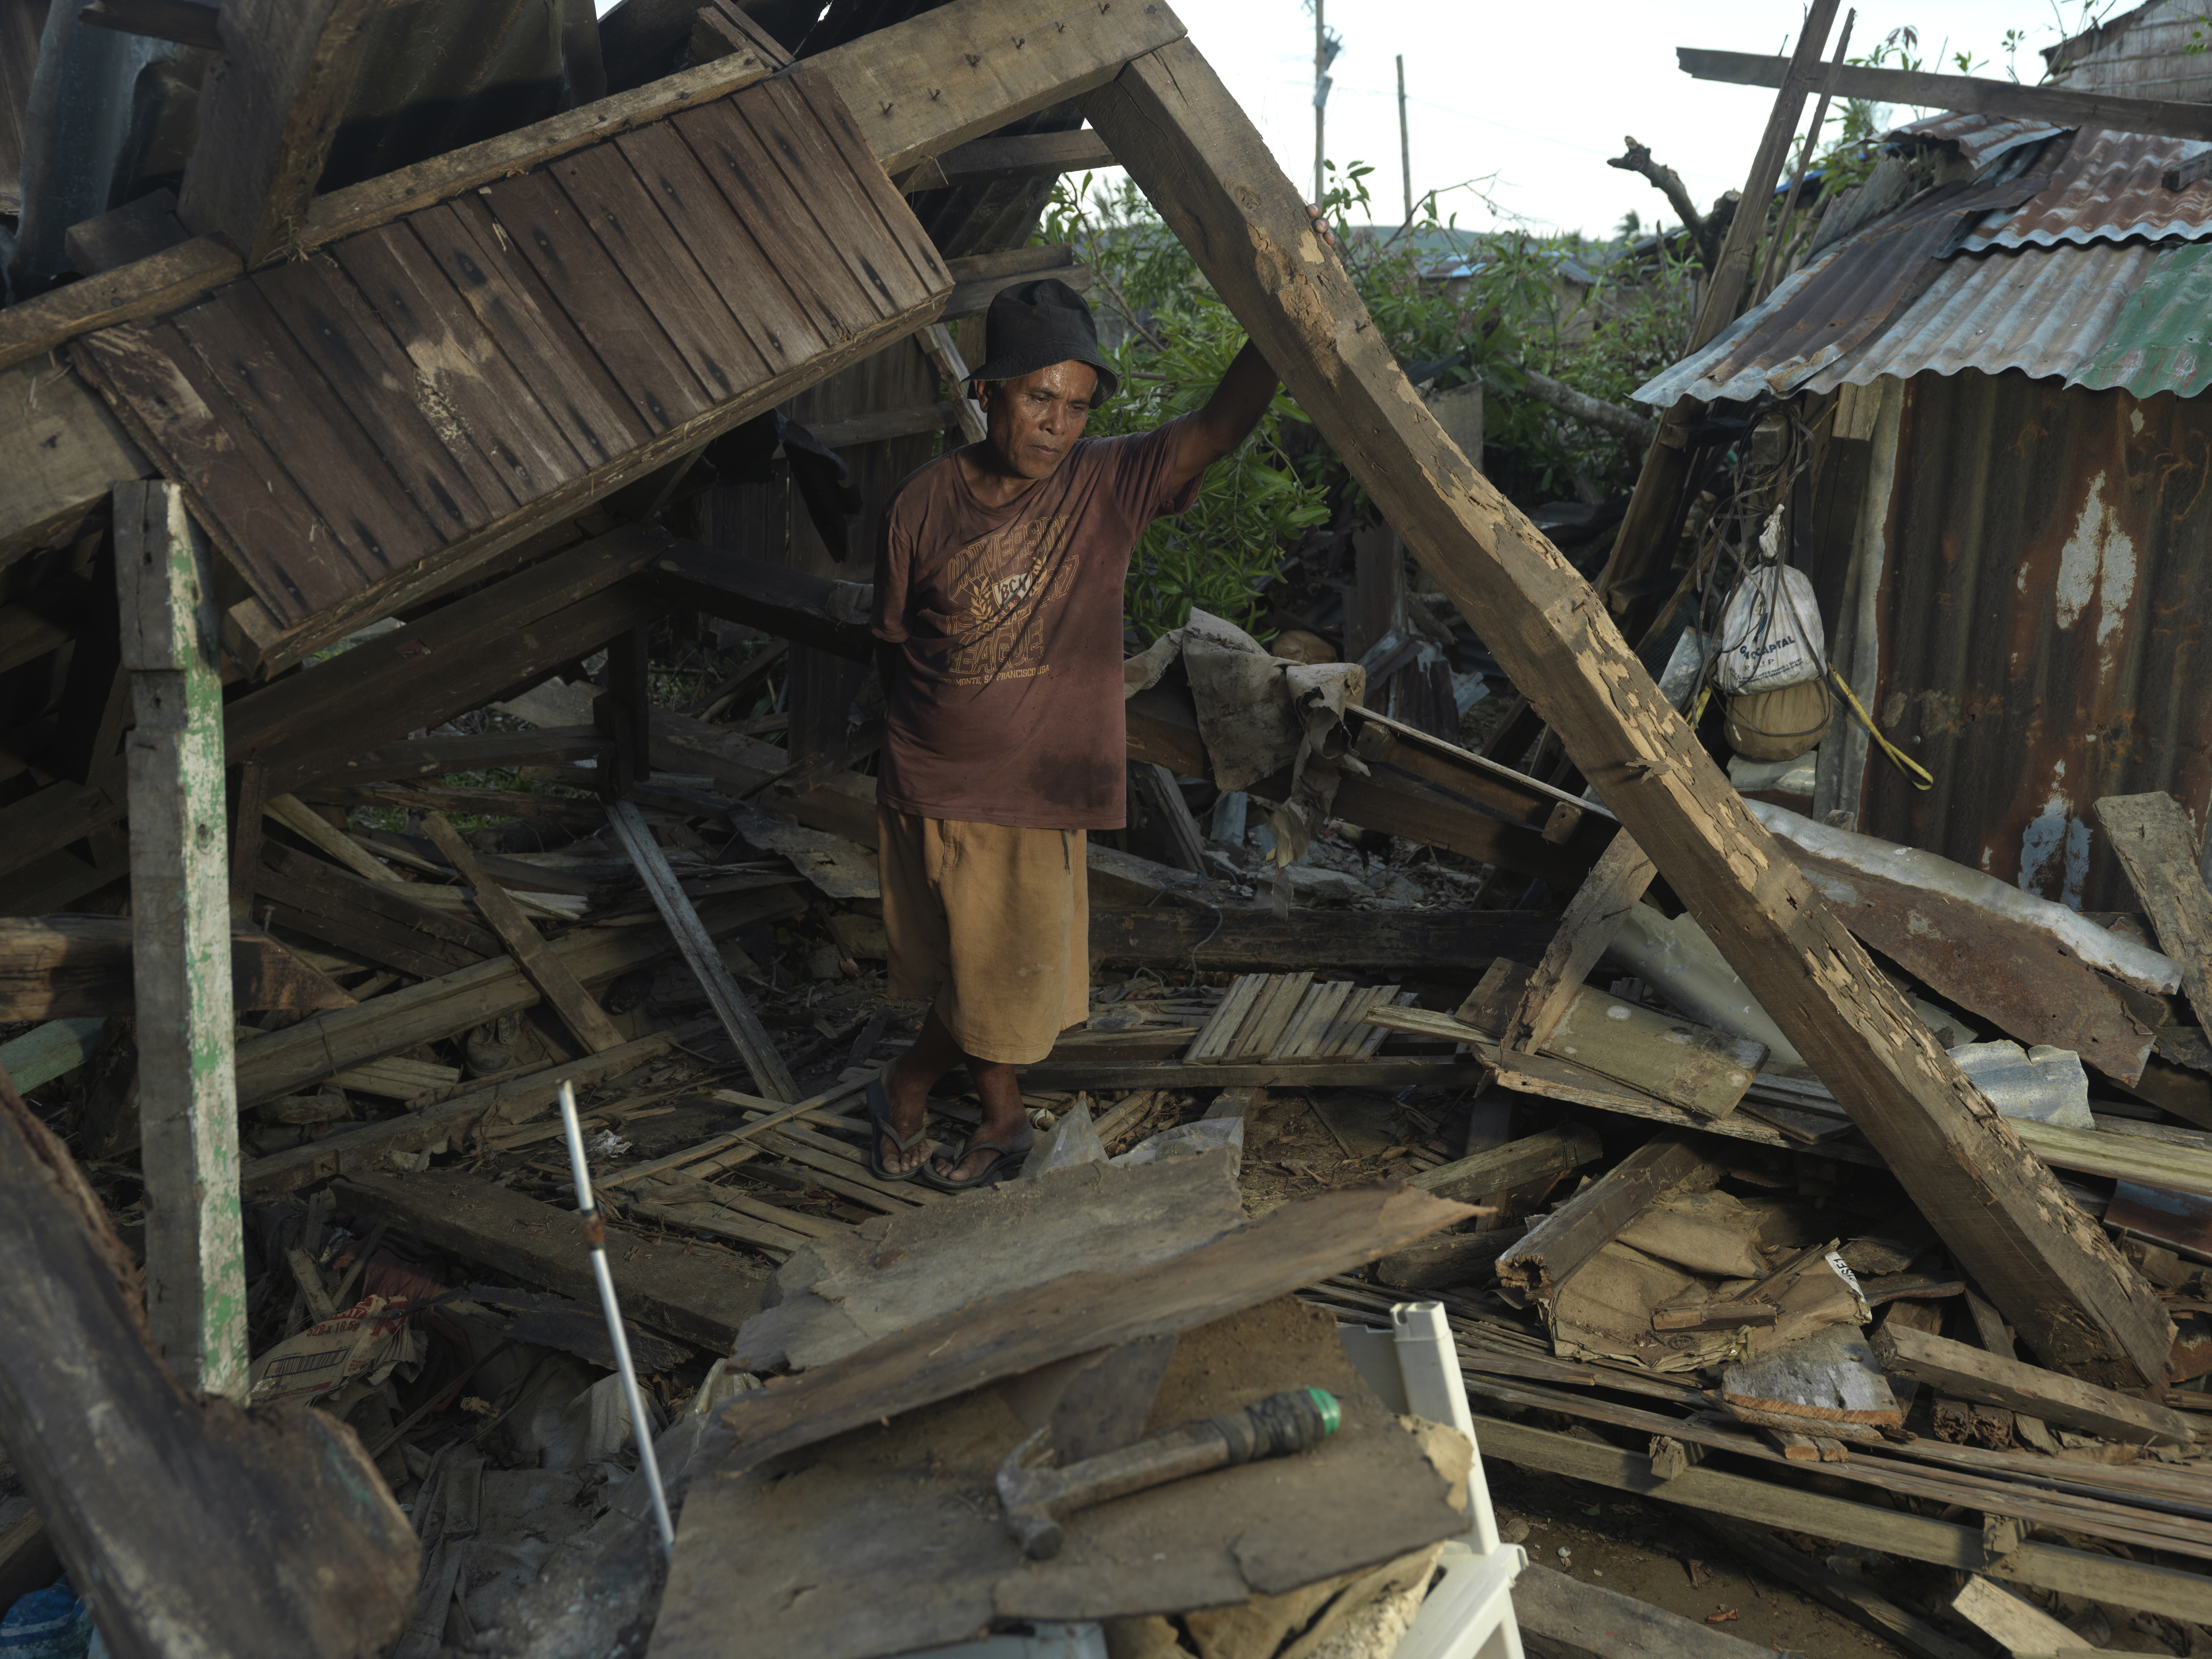 An older man shows the rubble of house destroyed in Typhoon Haiyan.